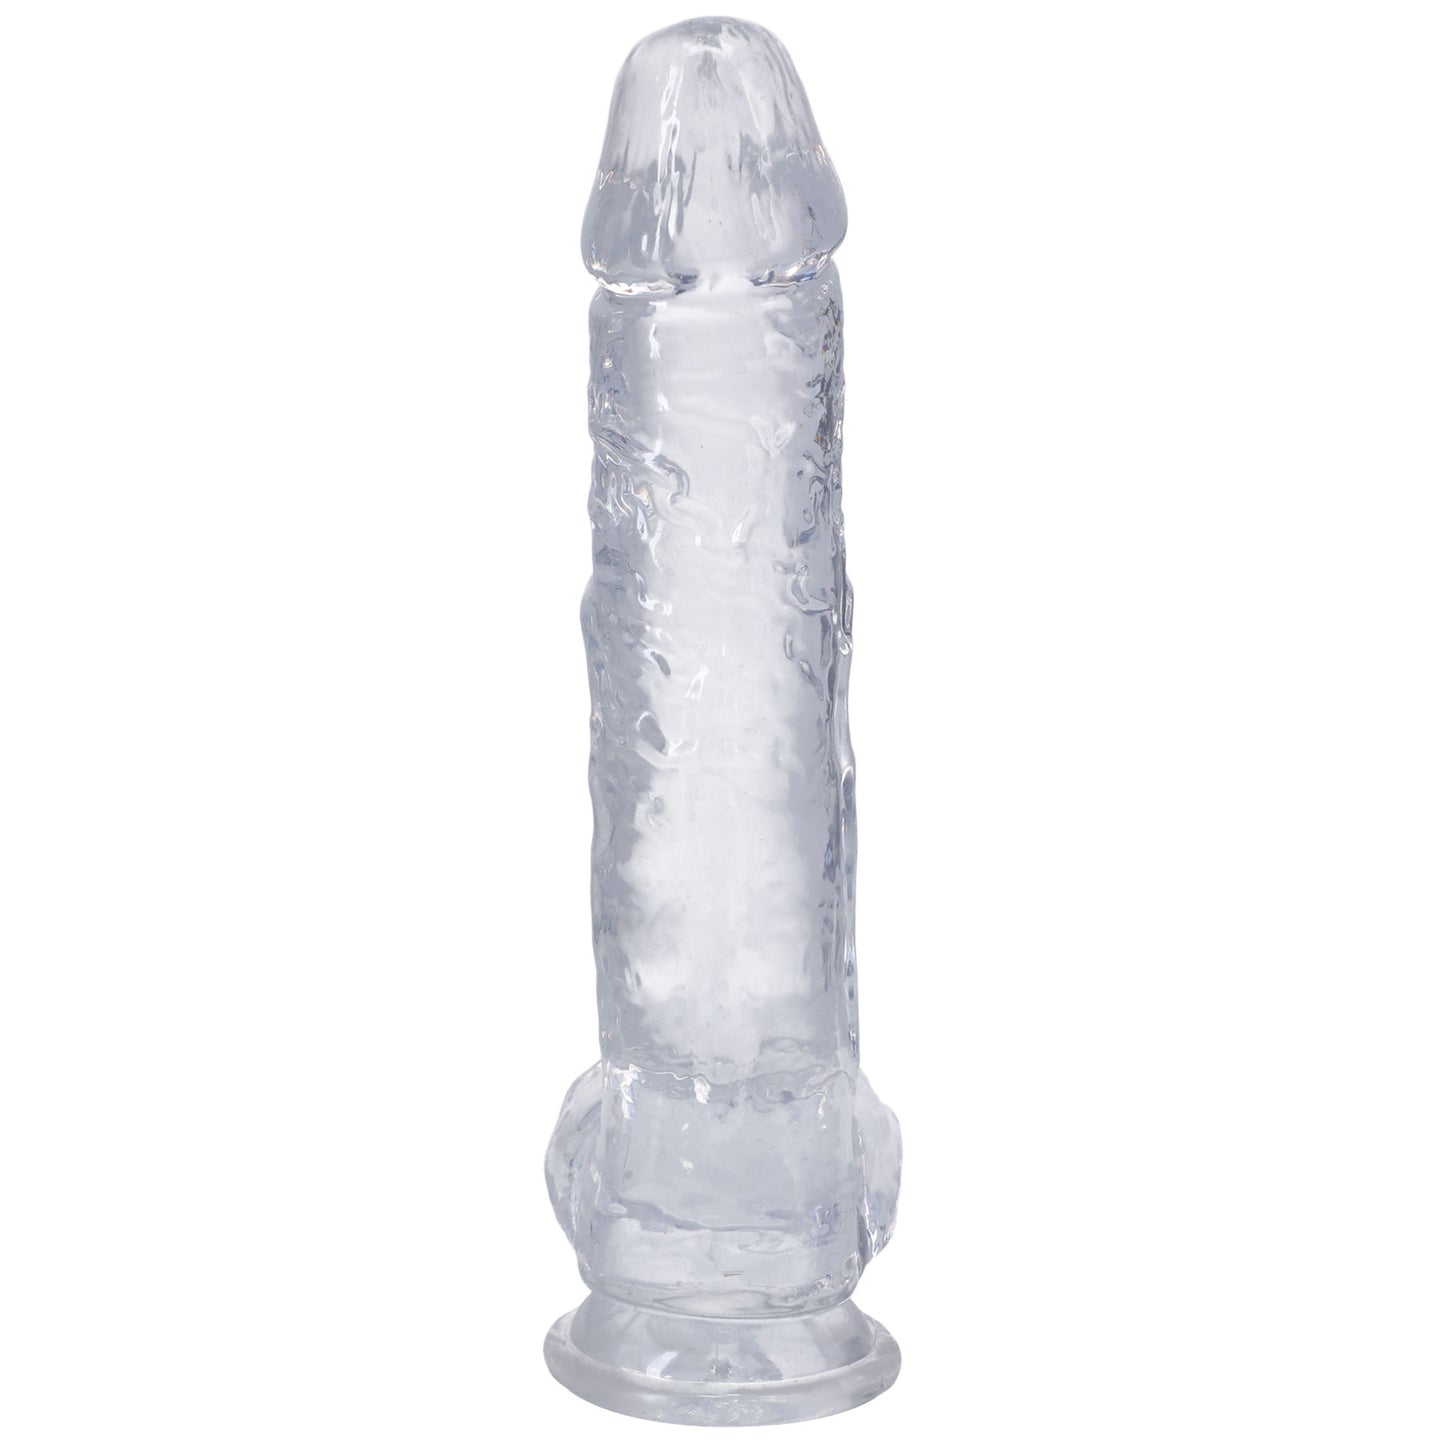 Really Big Dick in a Bag 10 Inch - Clear